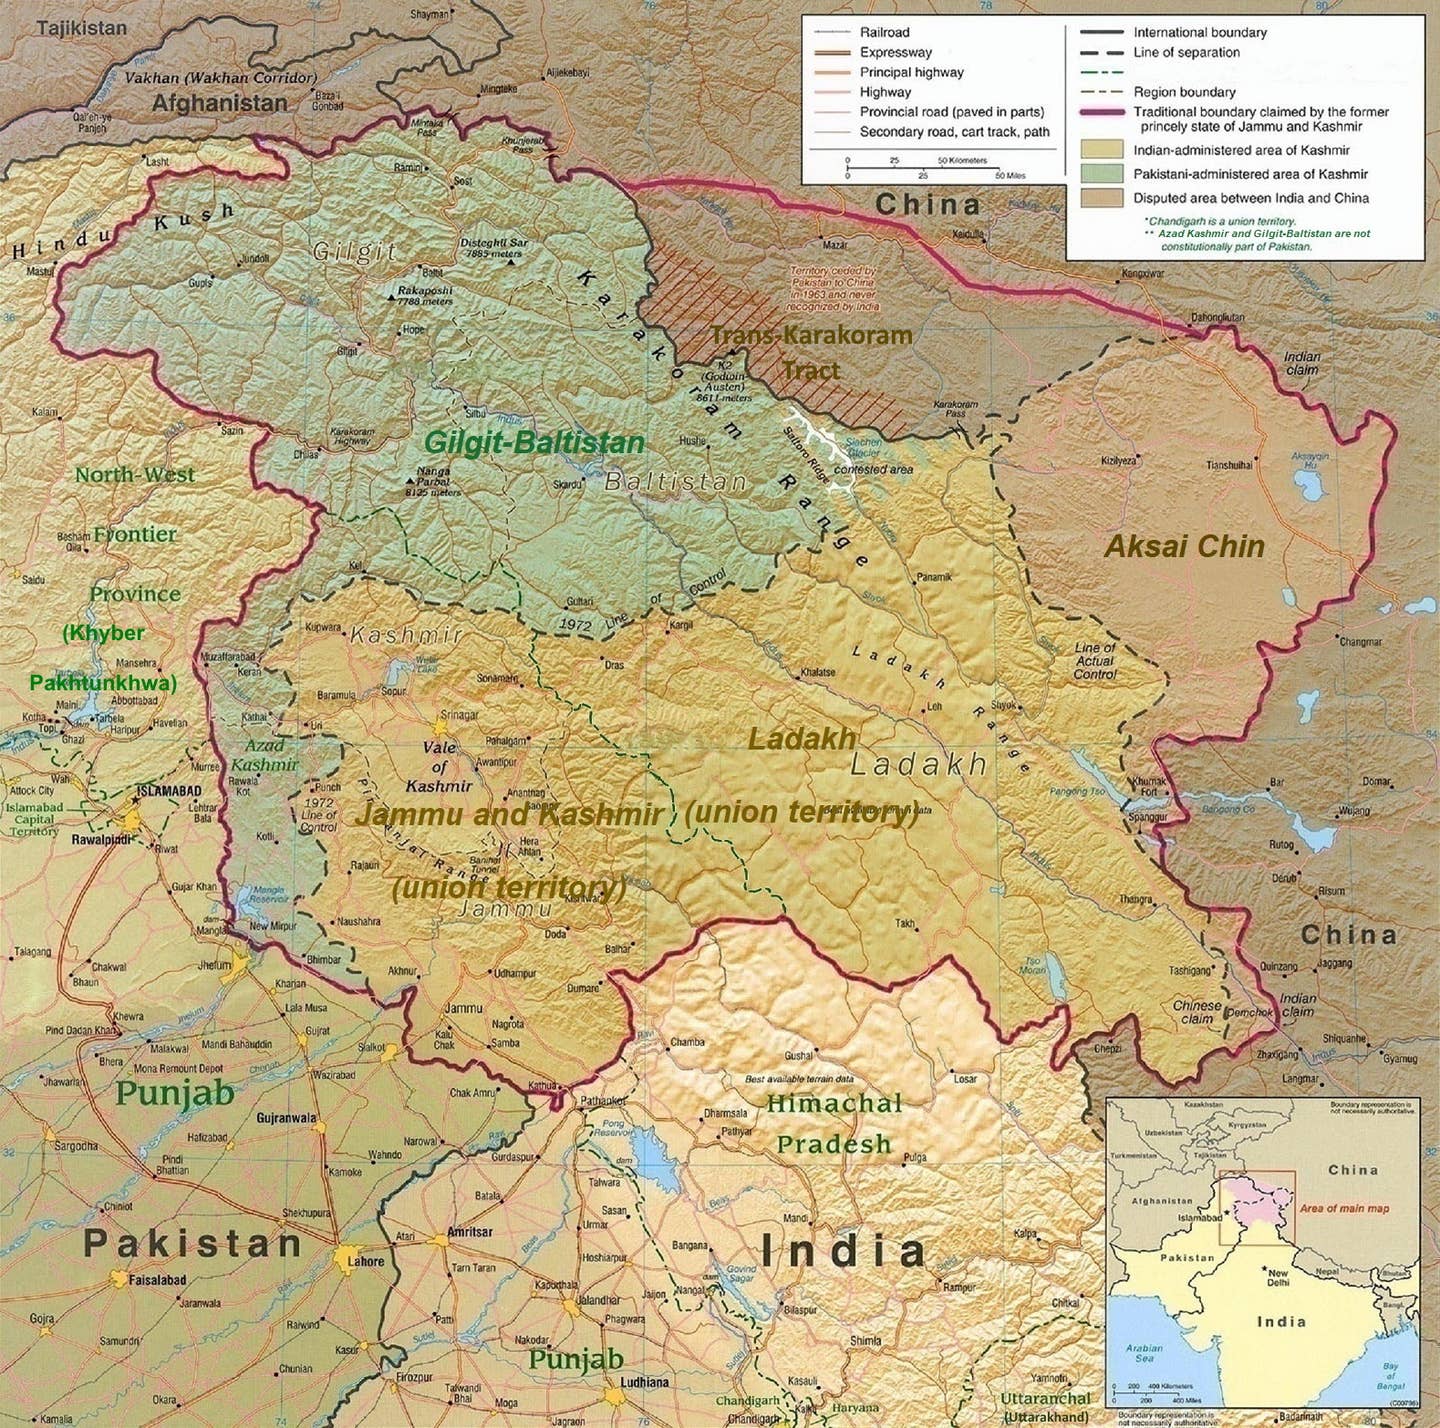 The western portion of the Line of Actual Control, separating Eastern Ladakh&nbsp;and&nbsp;Aksai Chin. <em>Credit: Map by the CIA via Wikimedia Commons</em>